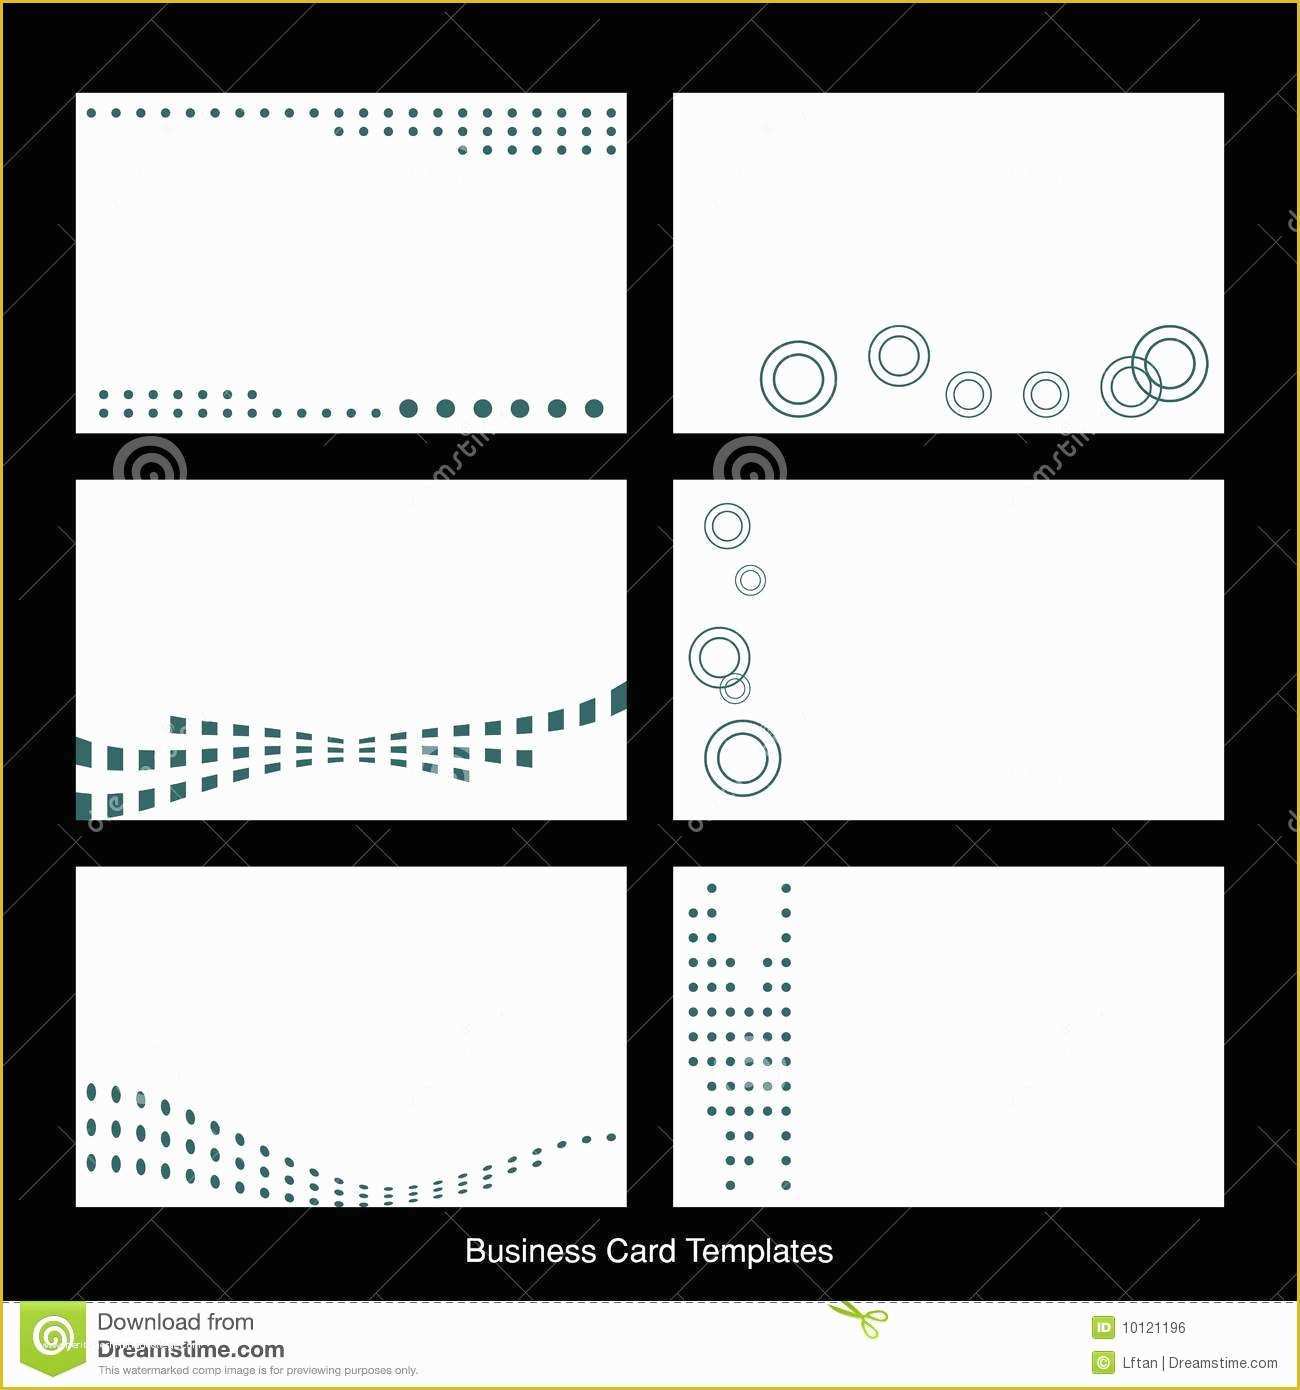 Free Picture Templates Of Business Card Templates Stock Vector Illustration Of Card